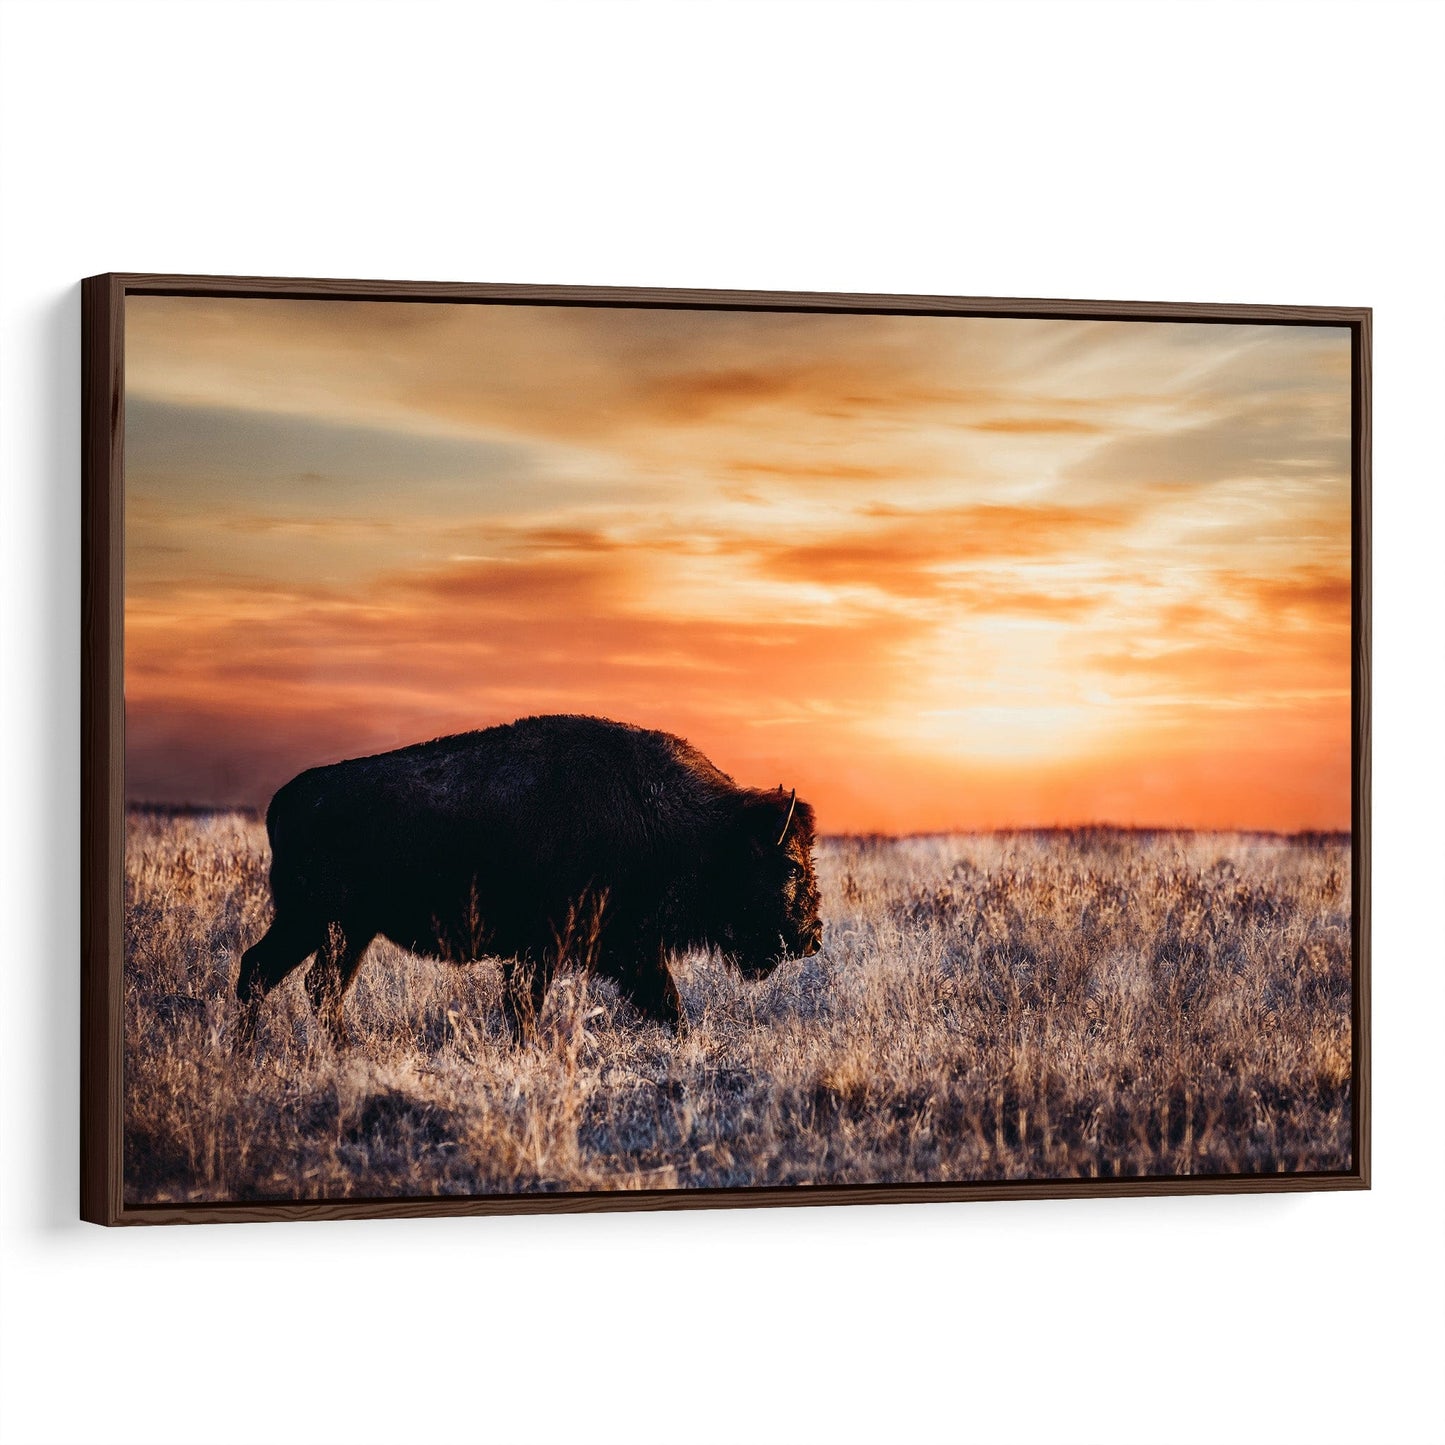 Bison Wall Art Canvas - Colorful Orange Sunset Canvas-Walnut Frame / 12 x 18 Inches Wall Art Teri James Photography